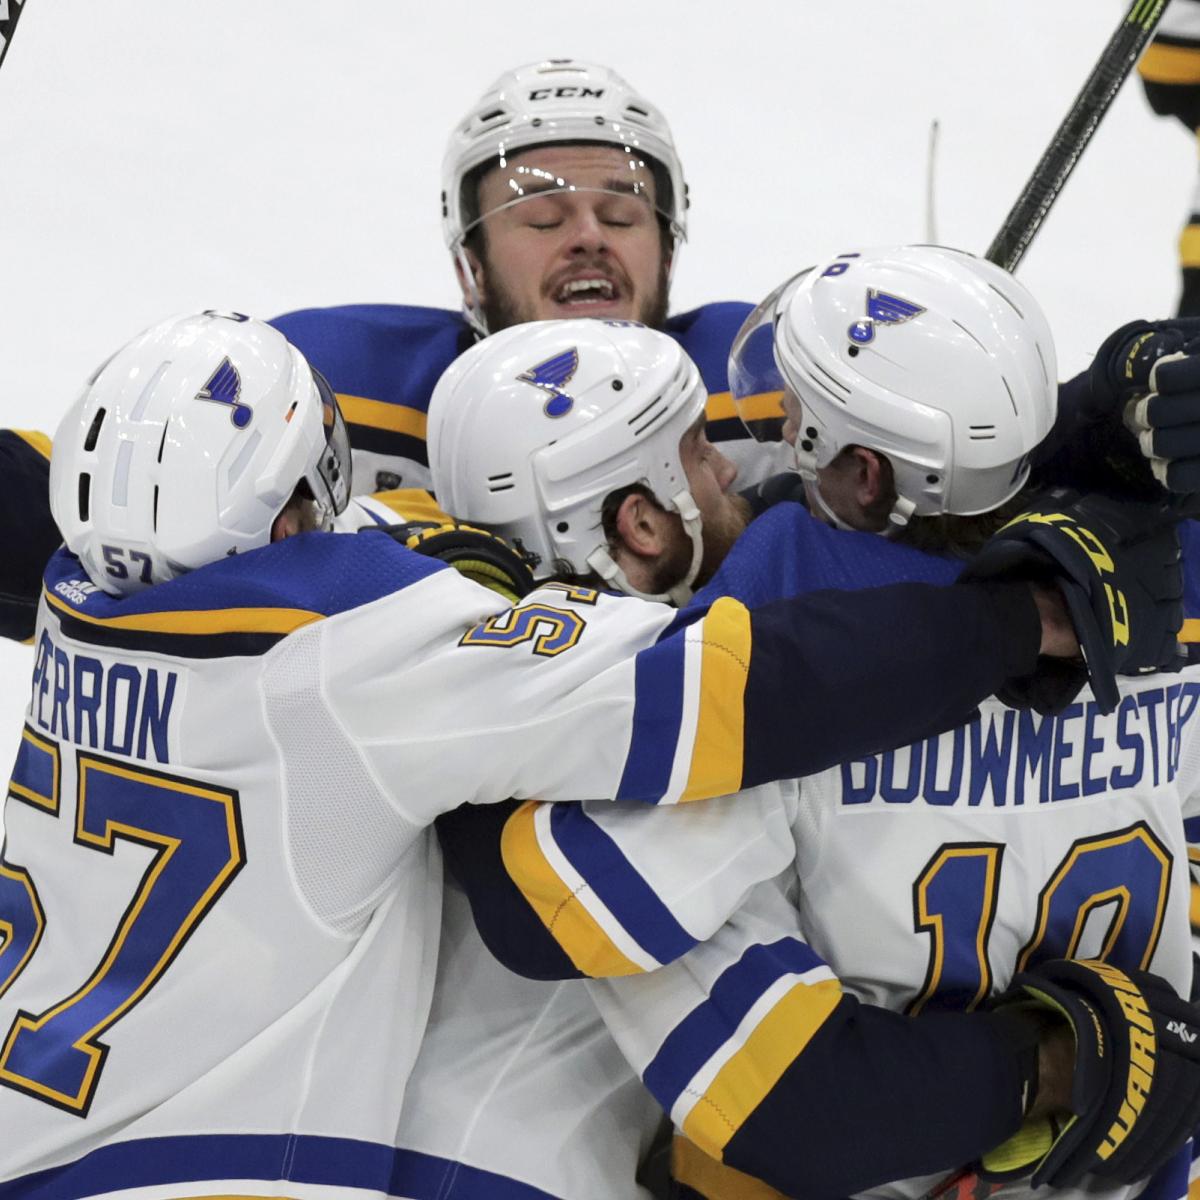 Blues Parade 2019: Route, Date, Schedule, TV Info and More | Bleacher Report | Latest News ...